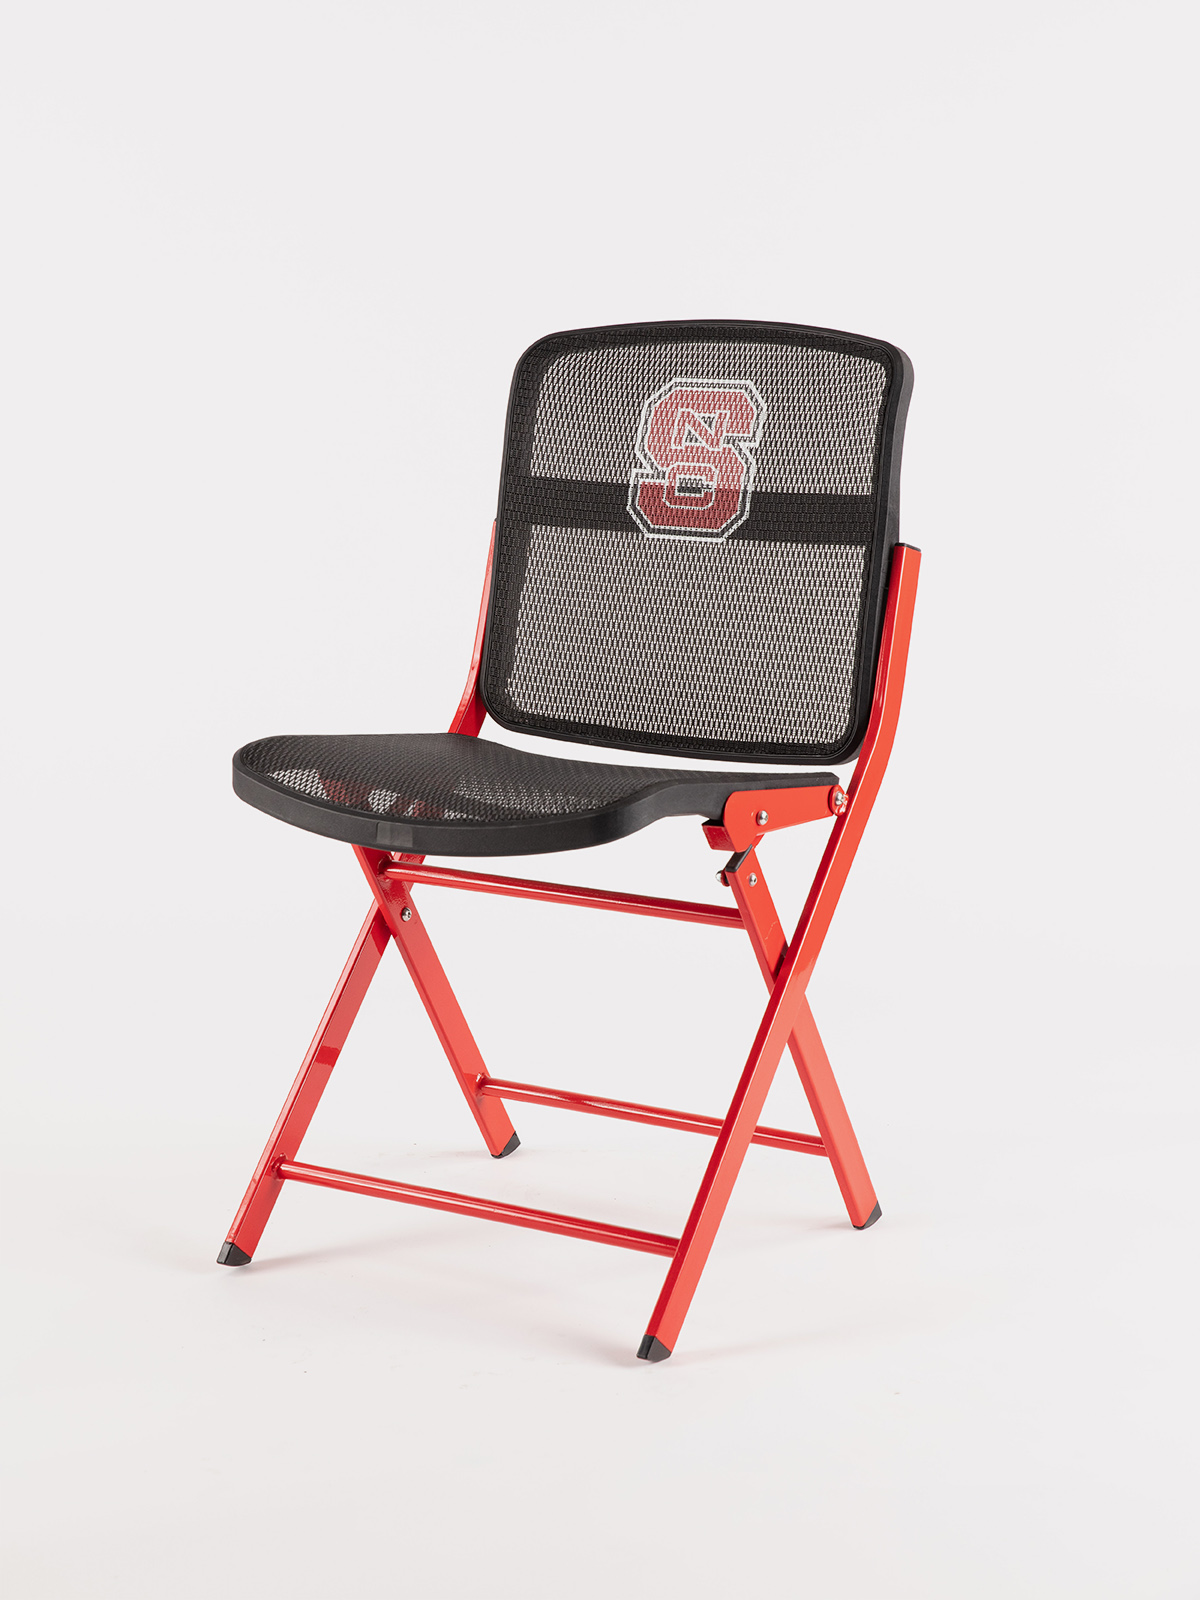 NC State 4 Topps folding seat on white background